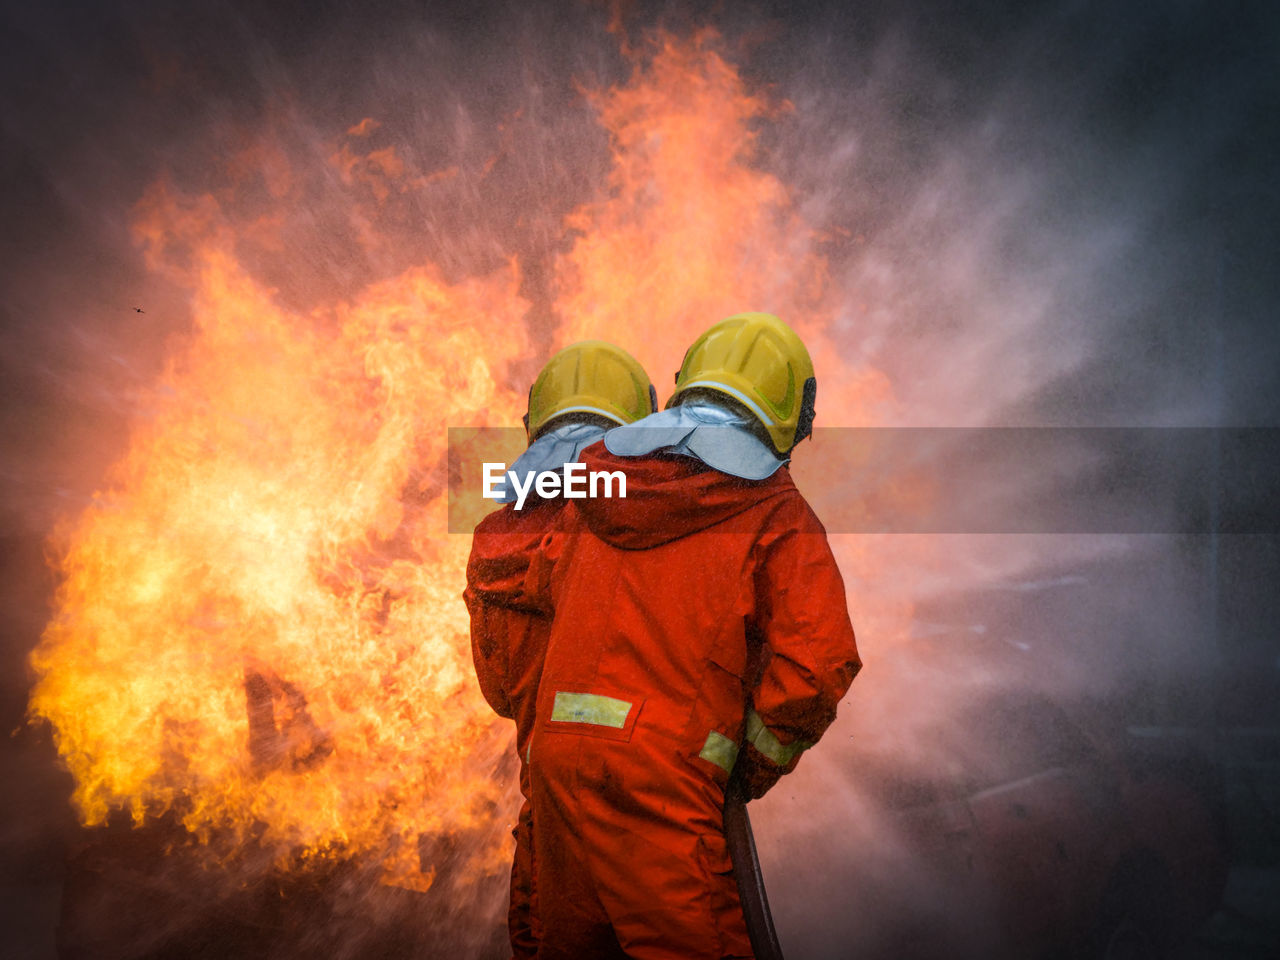 Fire fighter standing in front of explosion